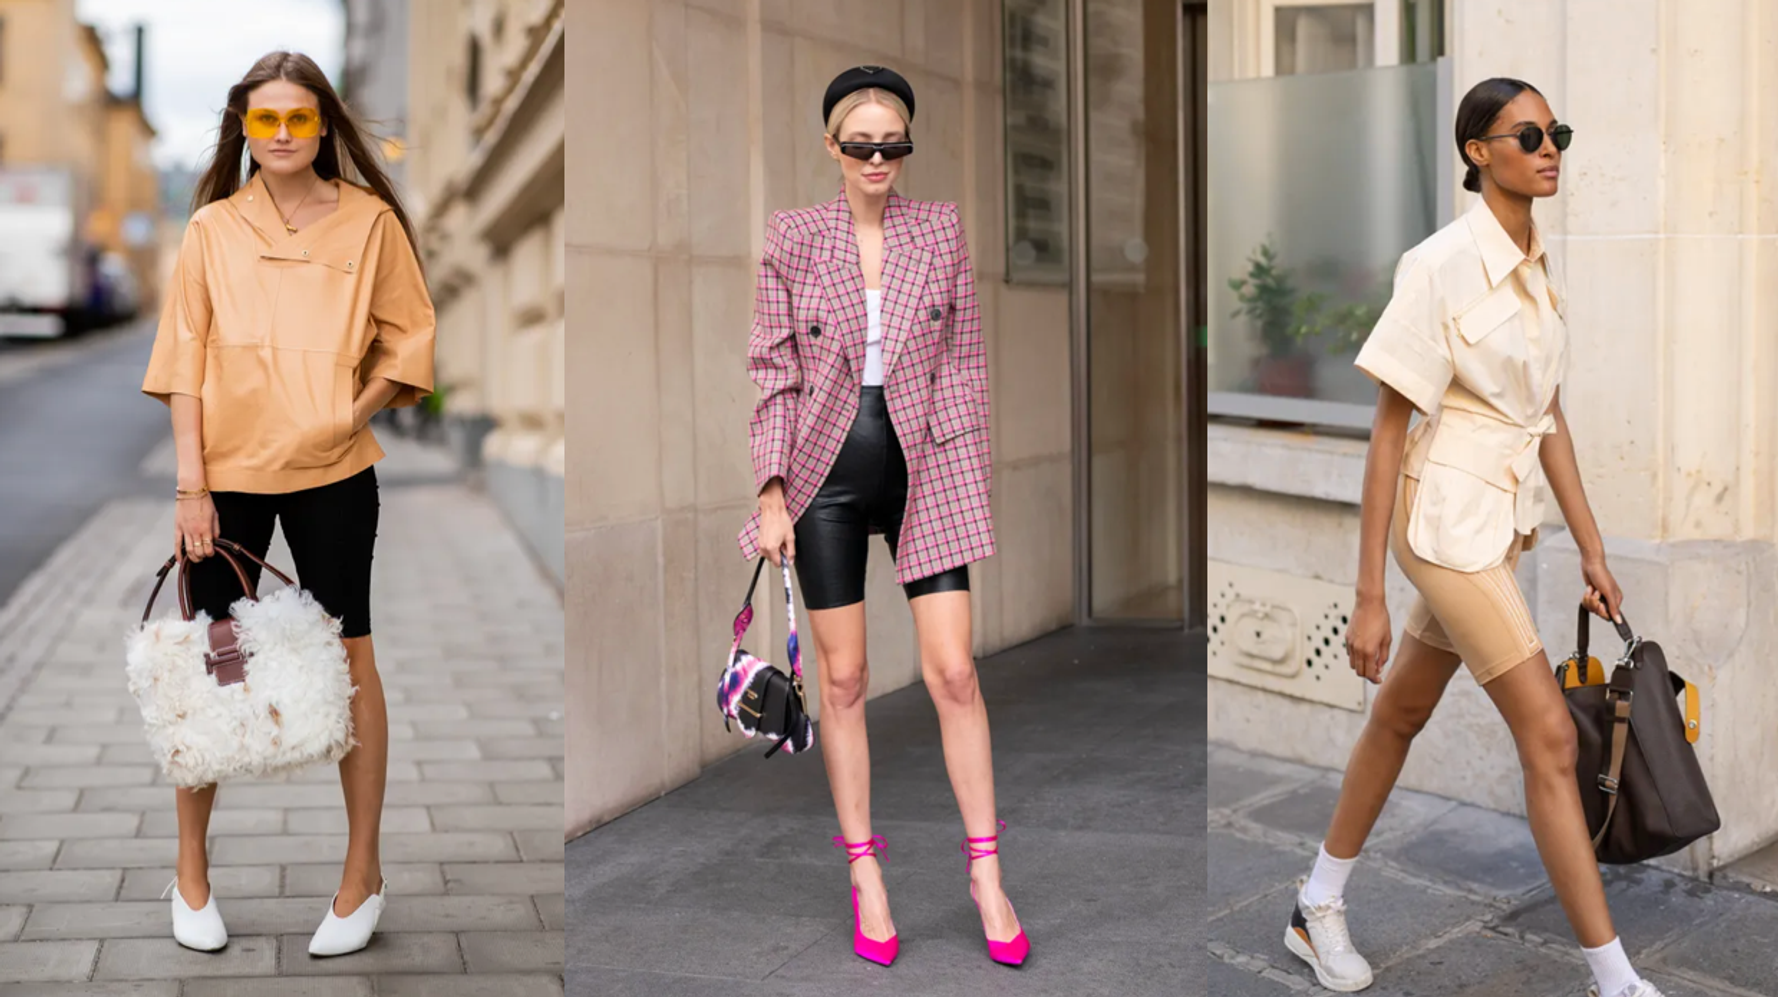 The Best High-Waisted Bike Shorts For Fashion